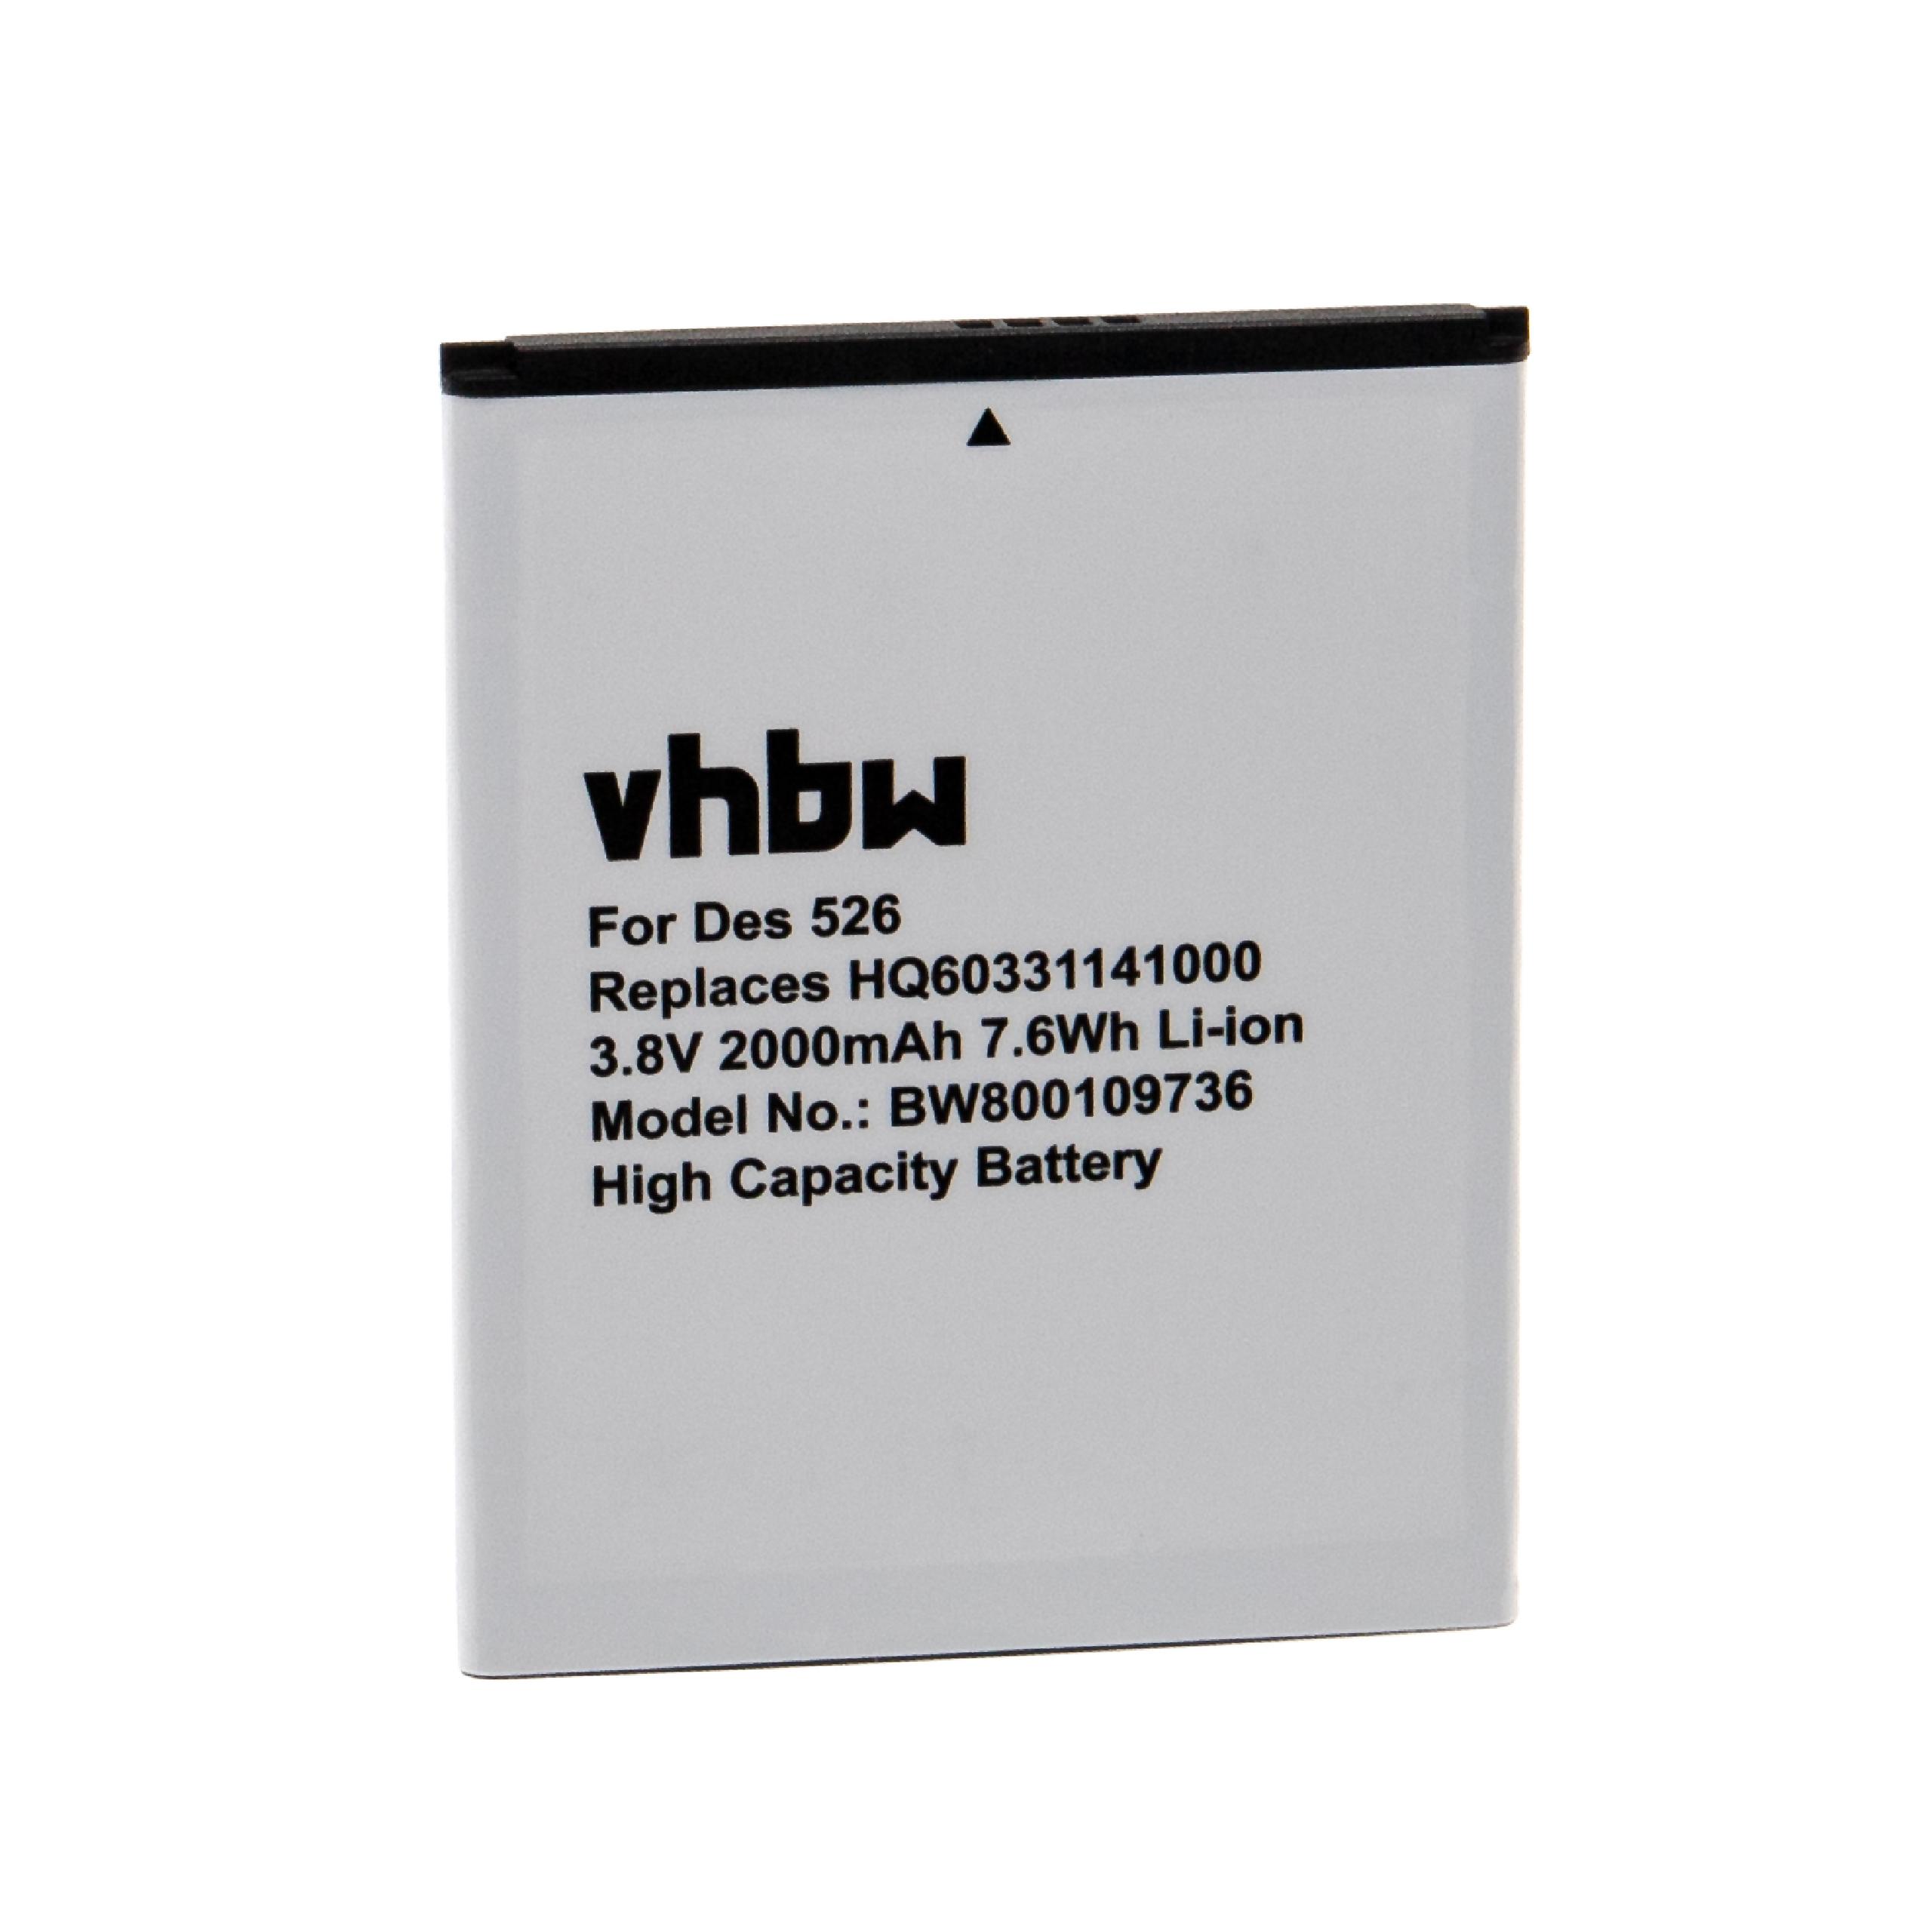 Mobile Phone Battery Replacement for BOPL4100 - 2000mAh 3.8V Li-Ion